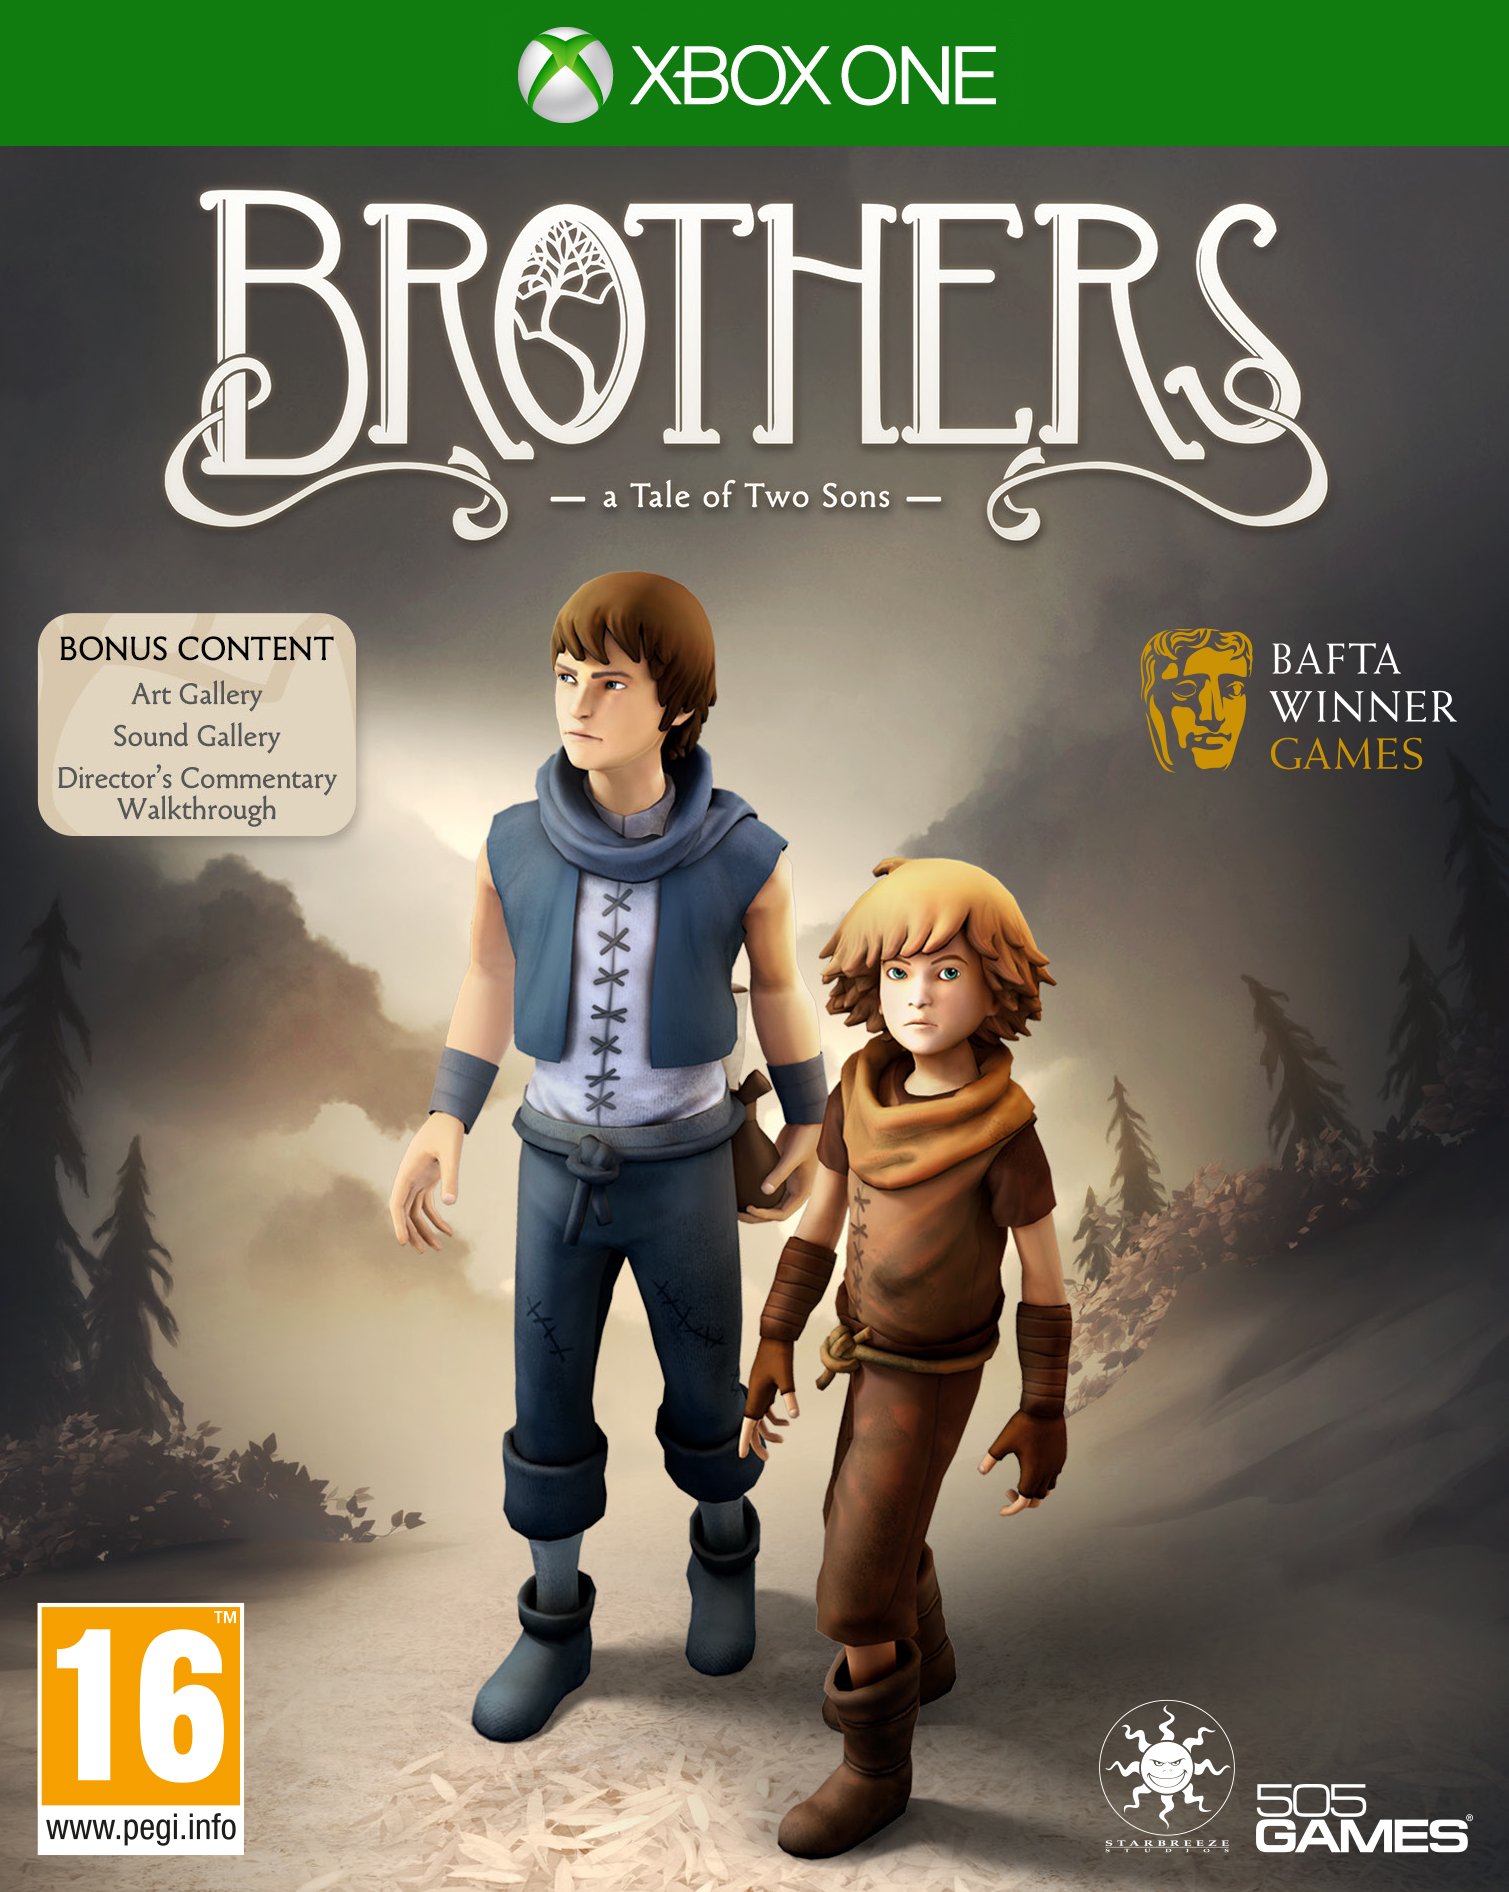 download free tales of two brothers